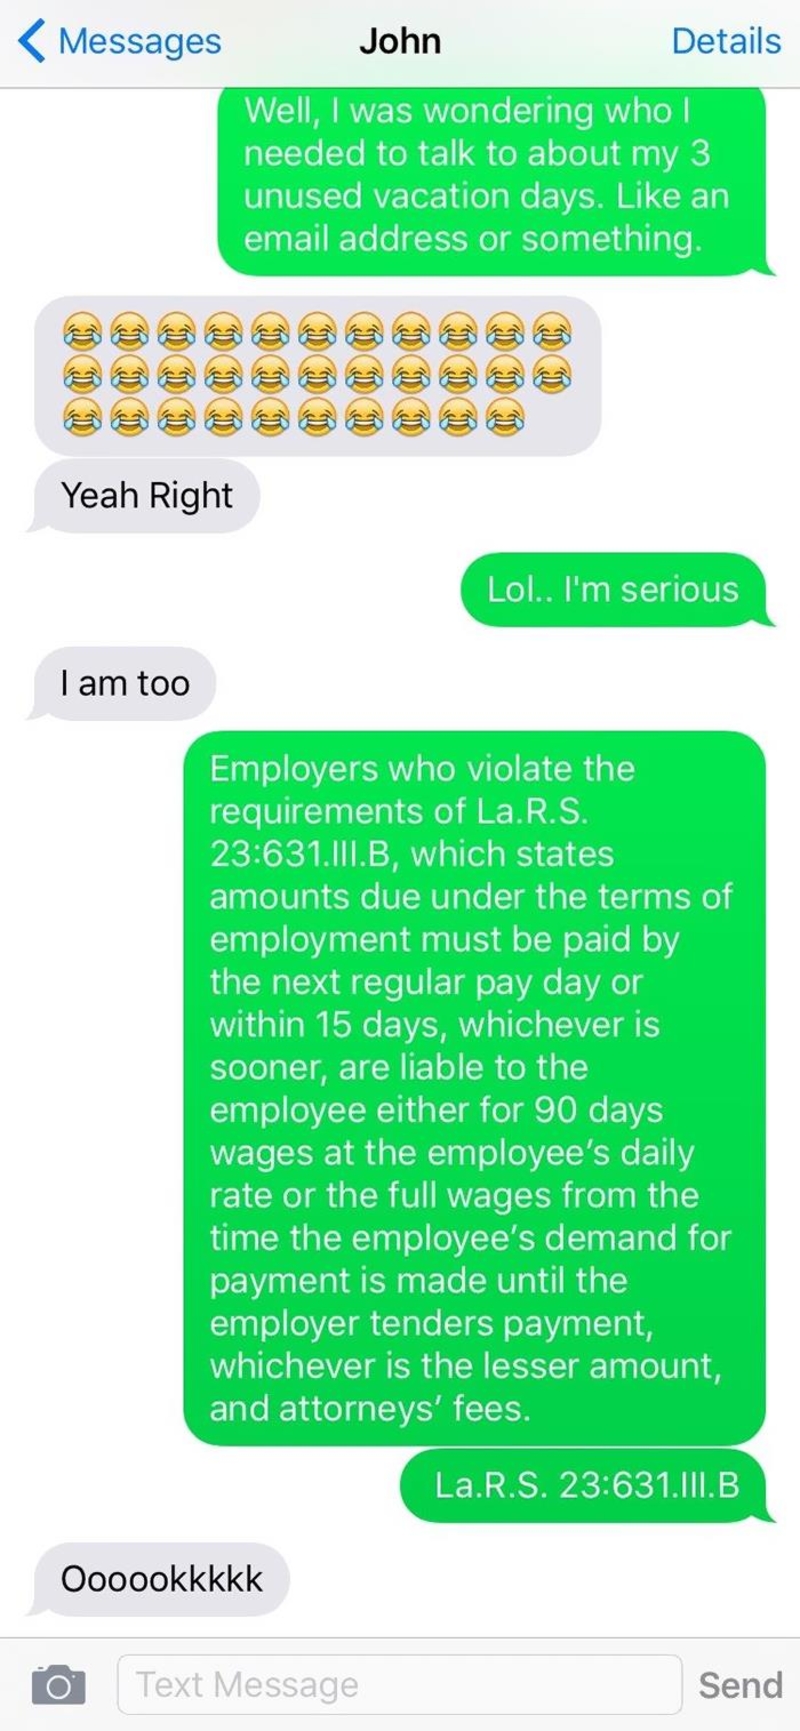 Does This Person Have a Fifteen Year Old as a Boss? | Imgur.com/minPD0309